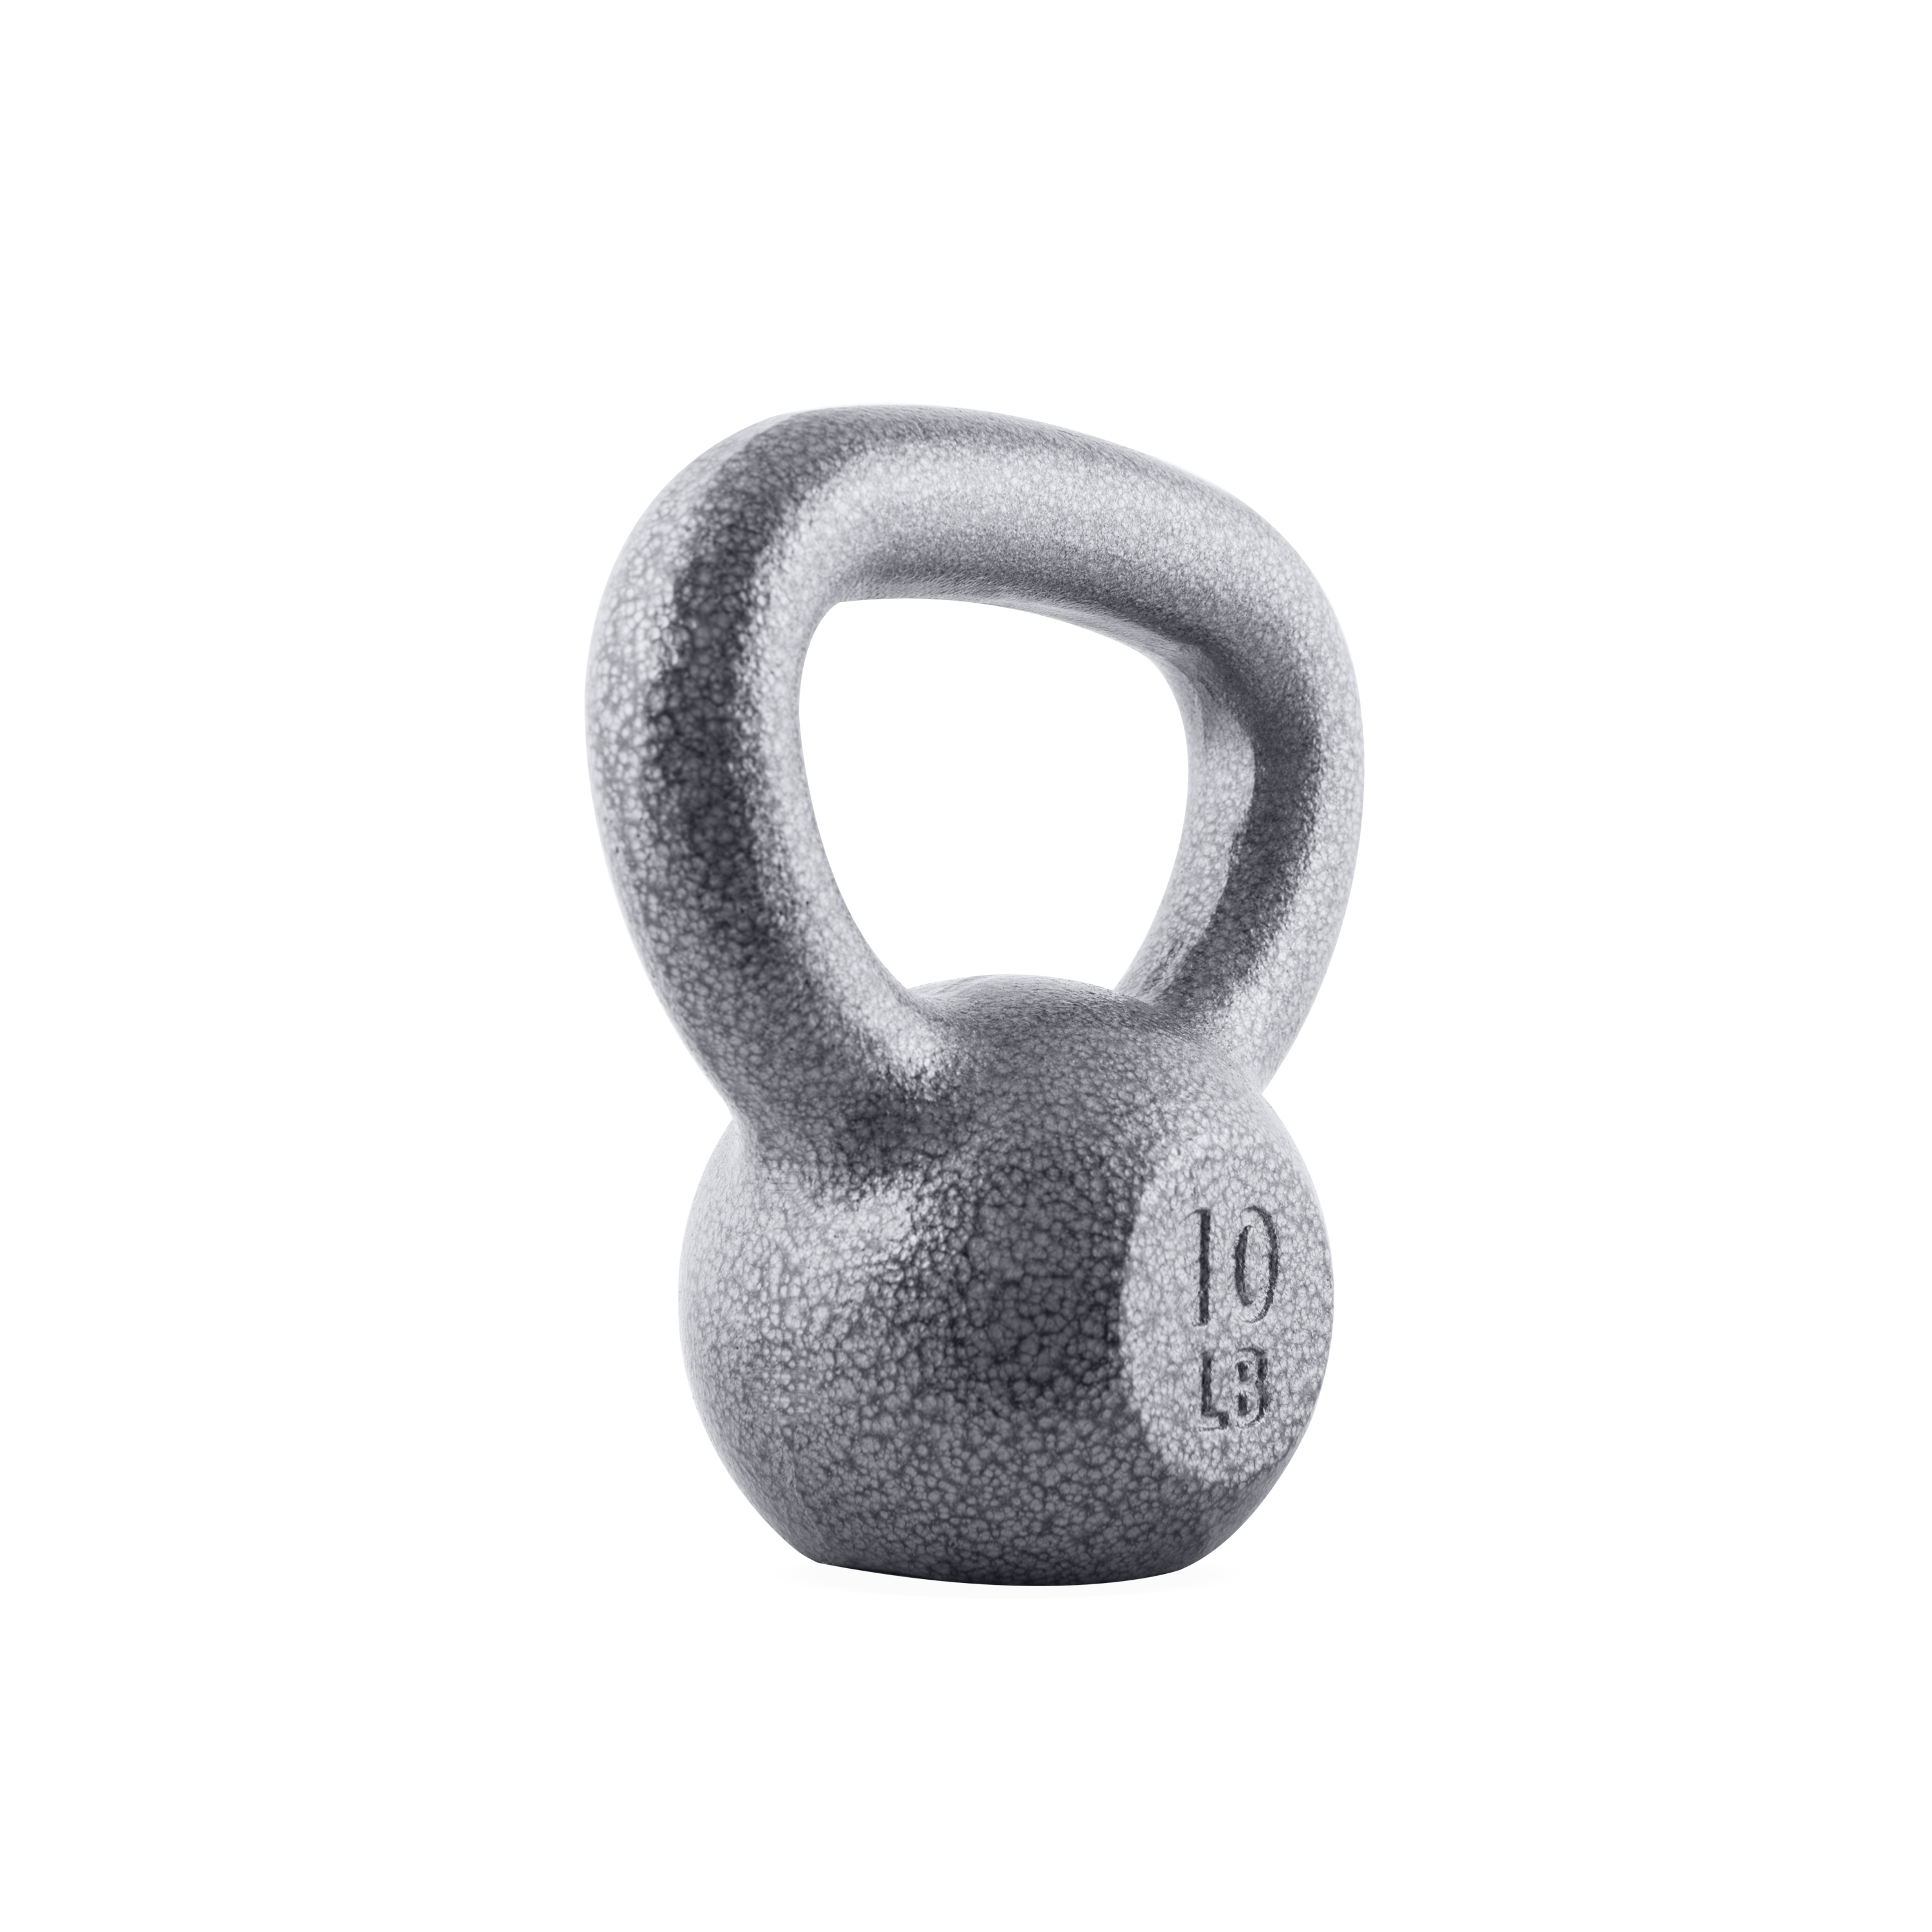 CAP Barbell Cast Iron Kettlebell, Single, 10-80 Pounds - image 3 of 7